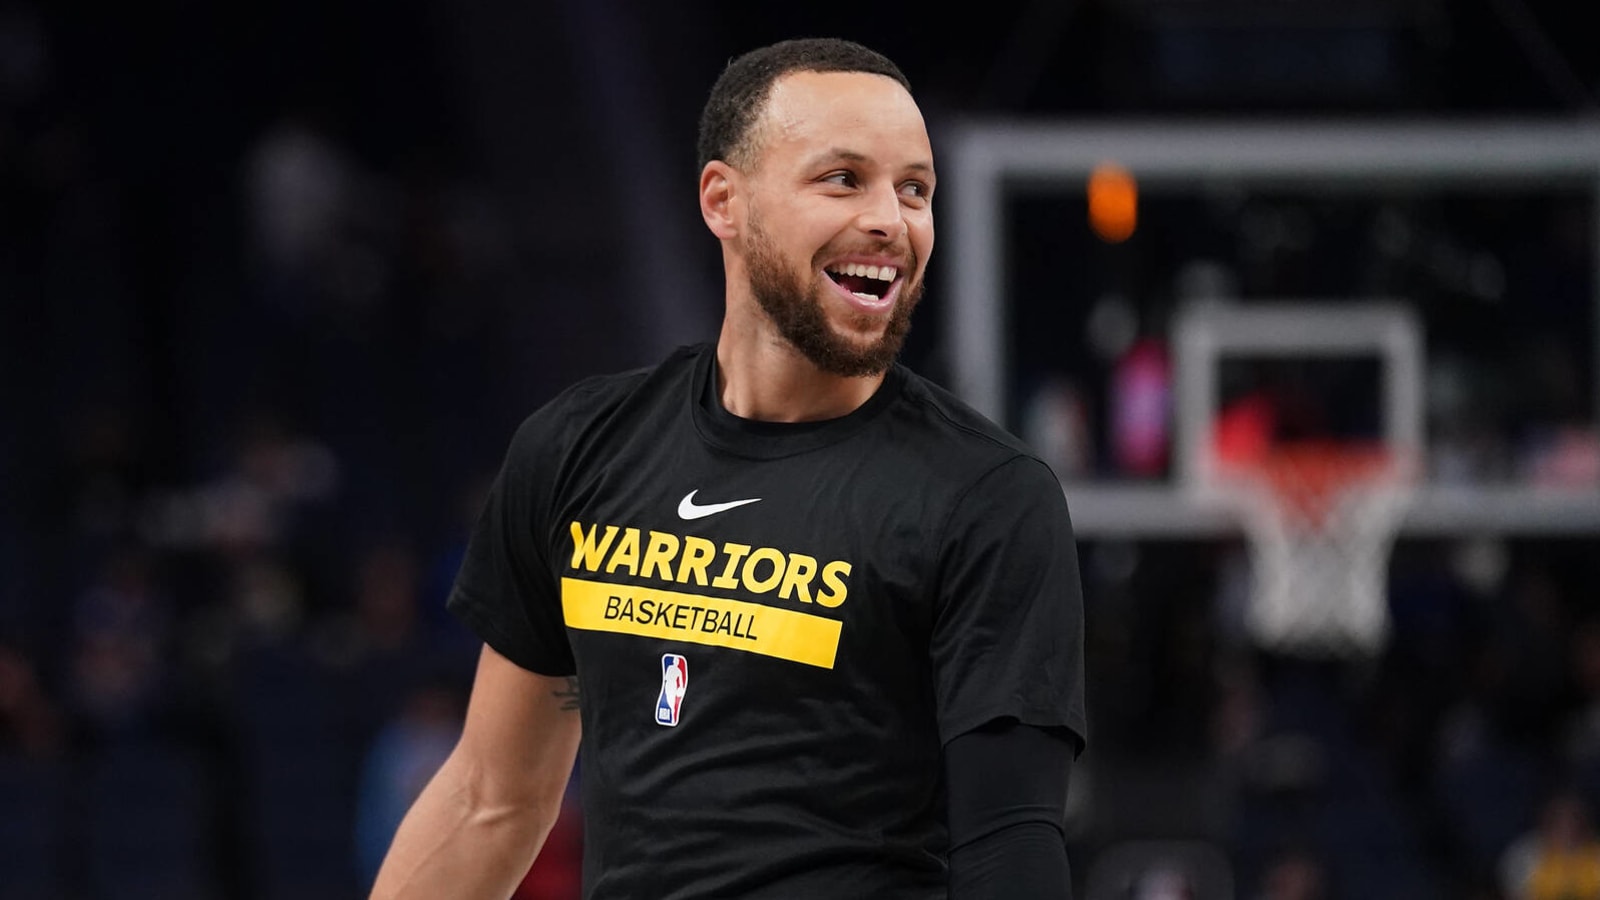 Warriors' Steph Curry asked NFL legends about playing past 35